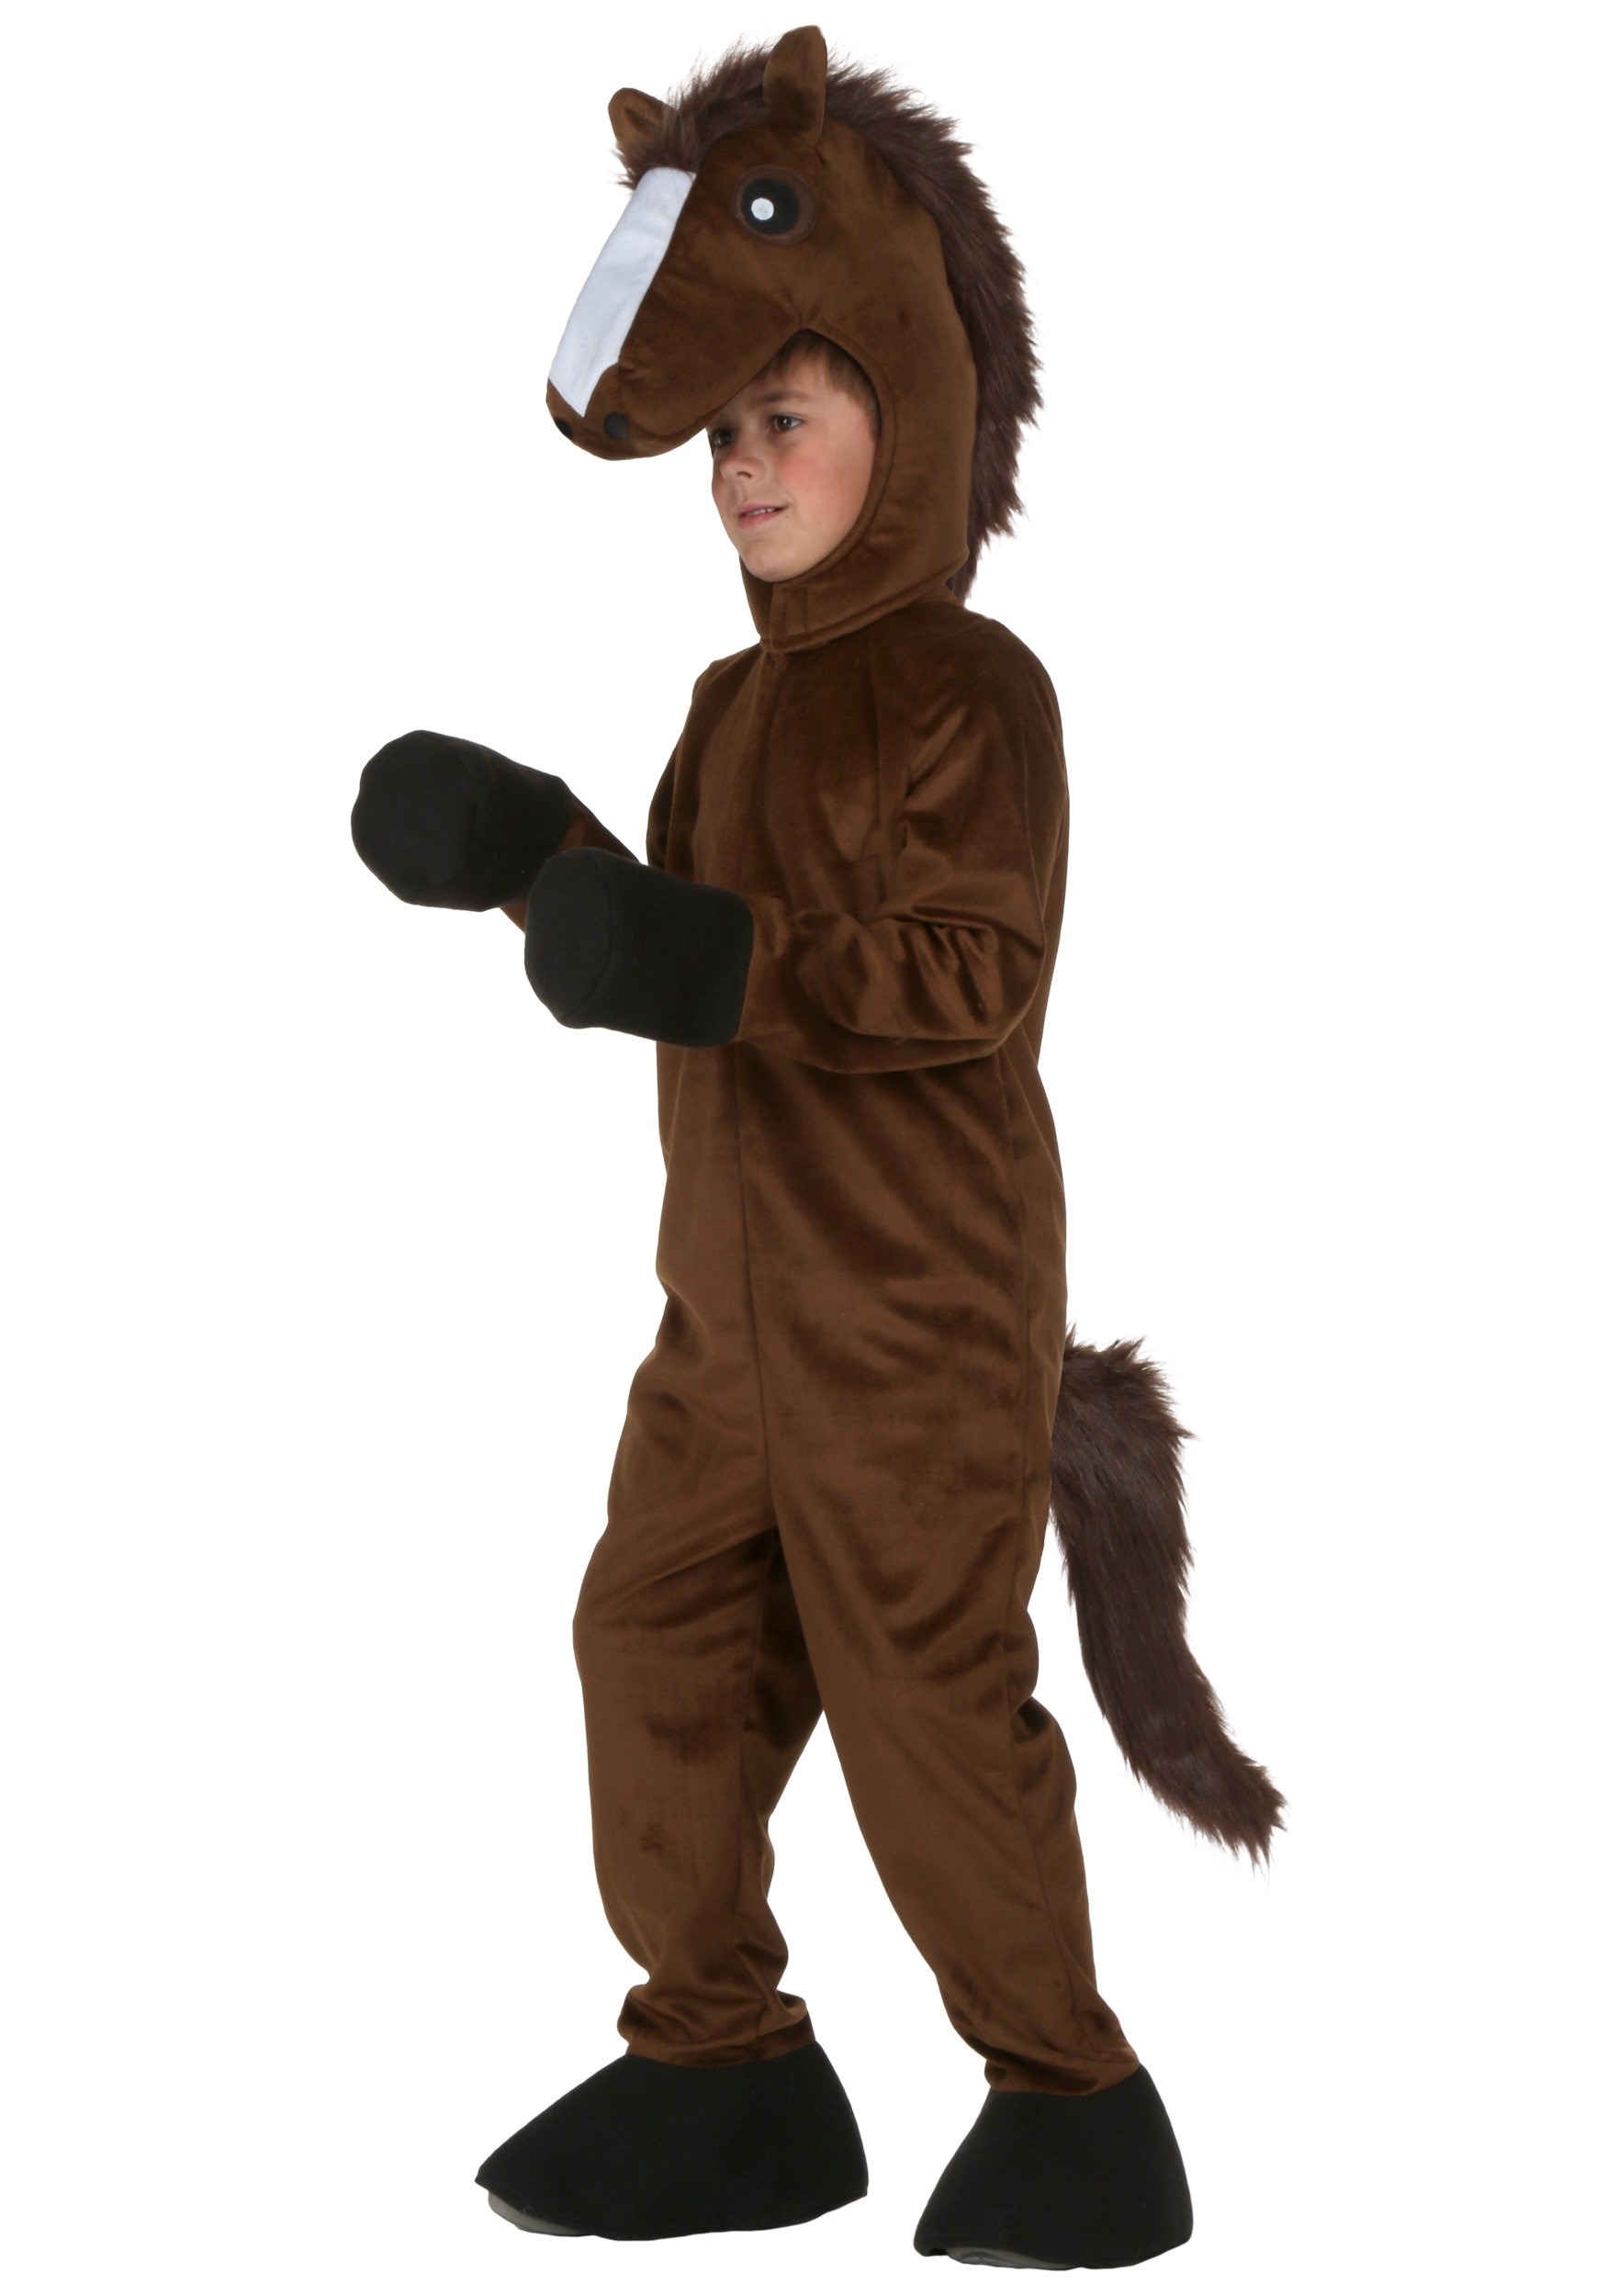 Horse Costume for Kids With Full Suit